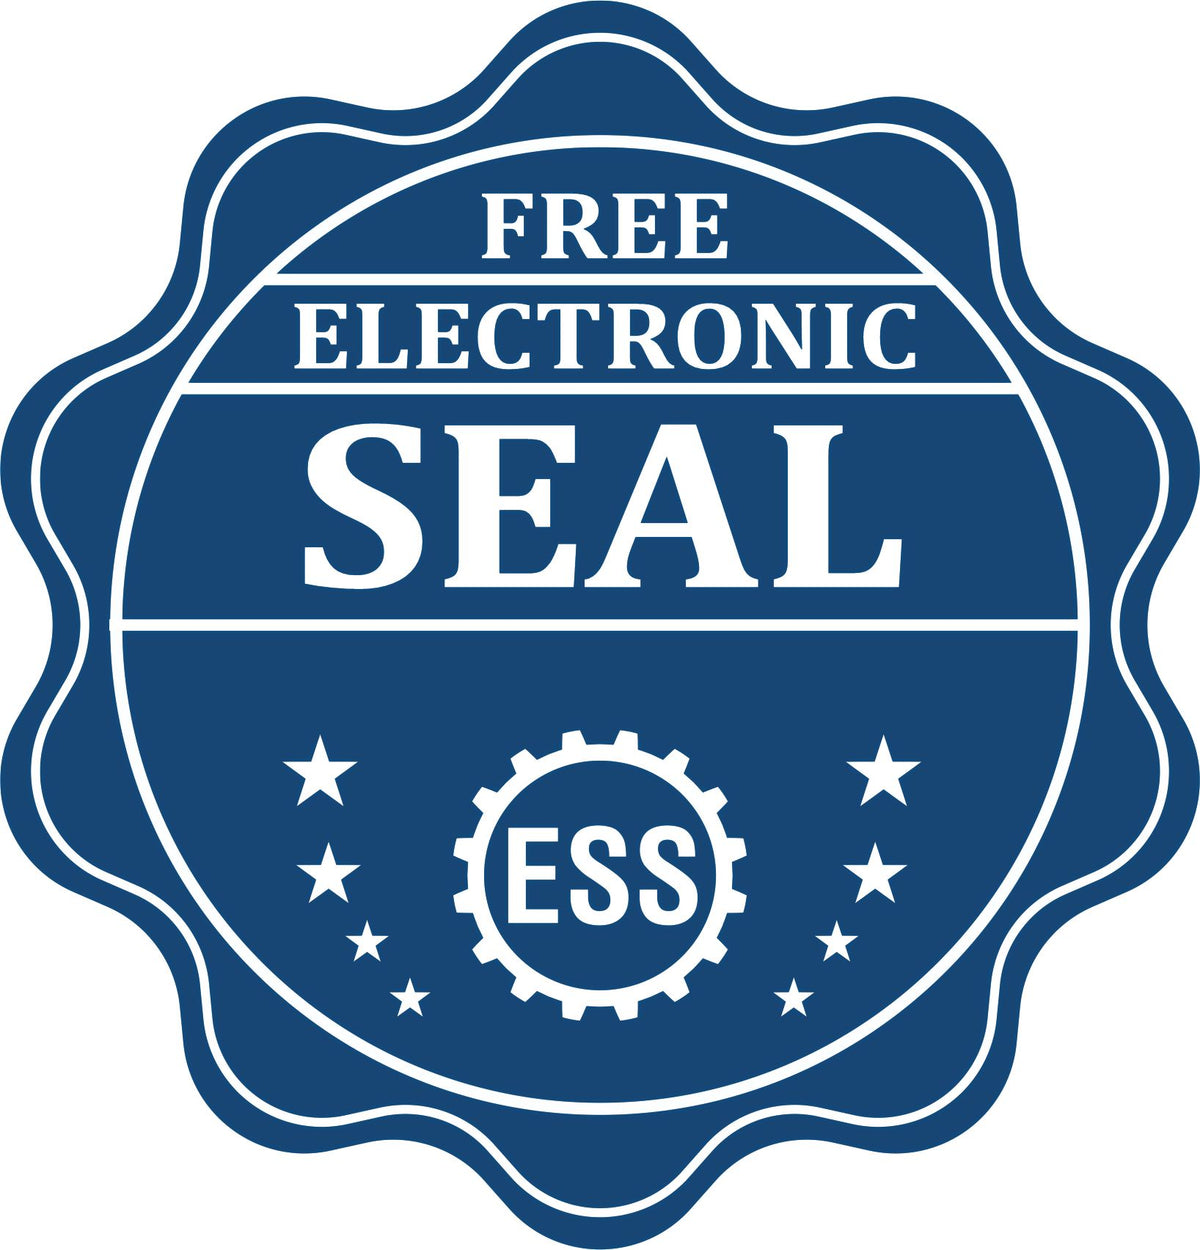 A badge showing a free electronic seal for the Handheld South Carolina Professional Geologist Embosser with stars and the ESS gear on the emblem.